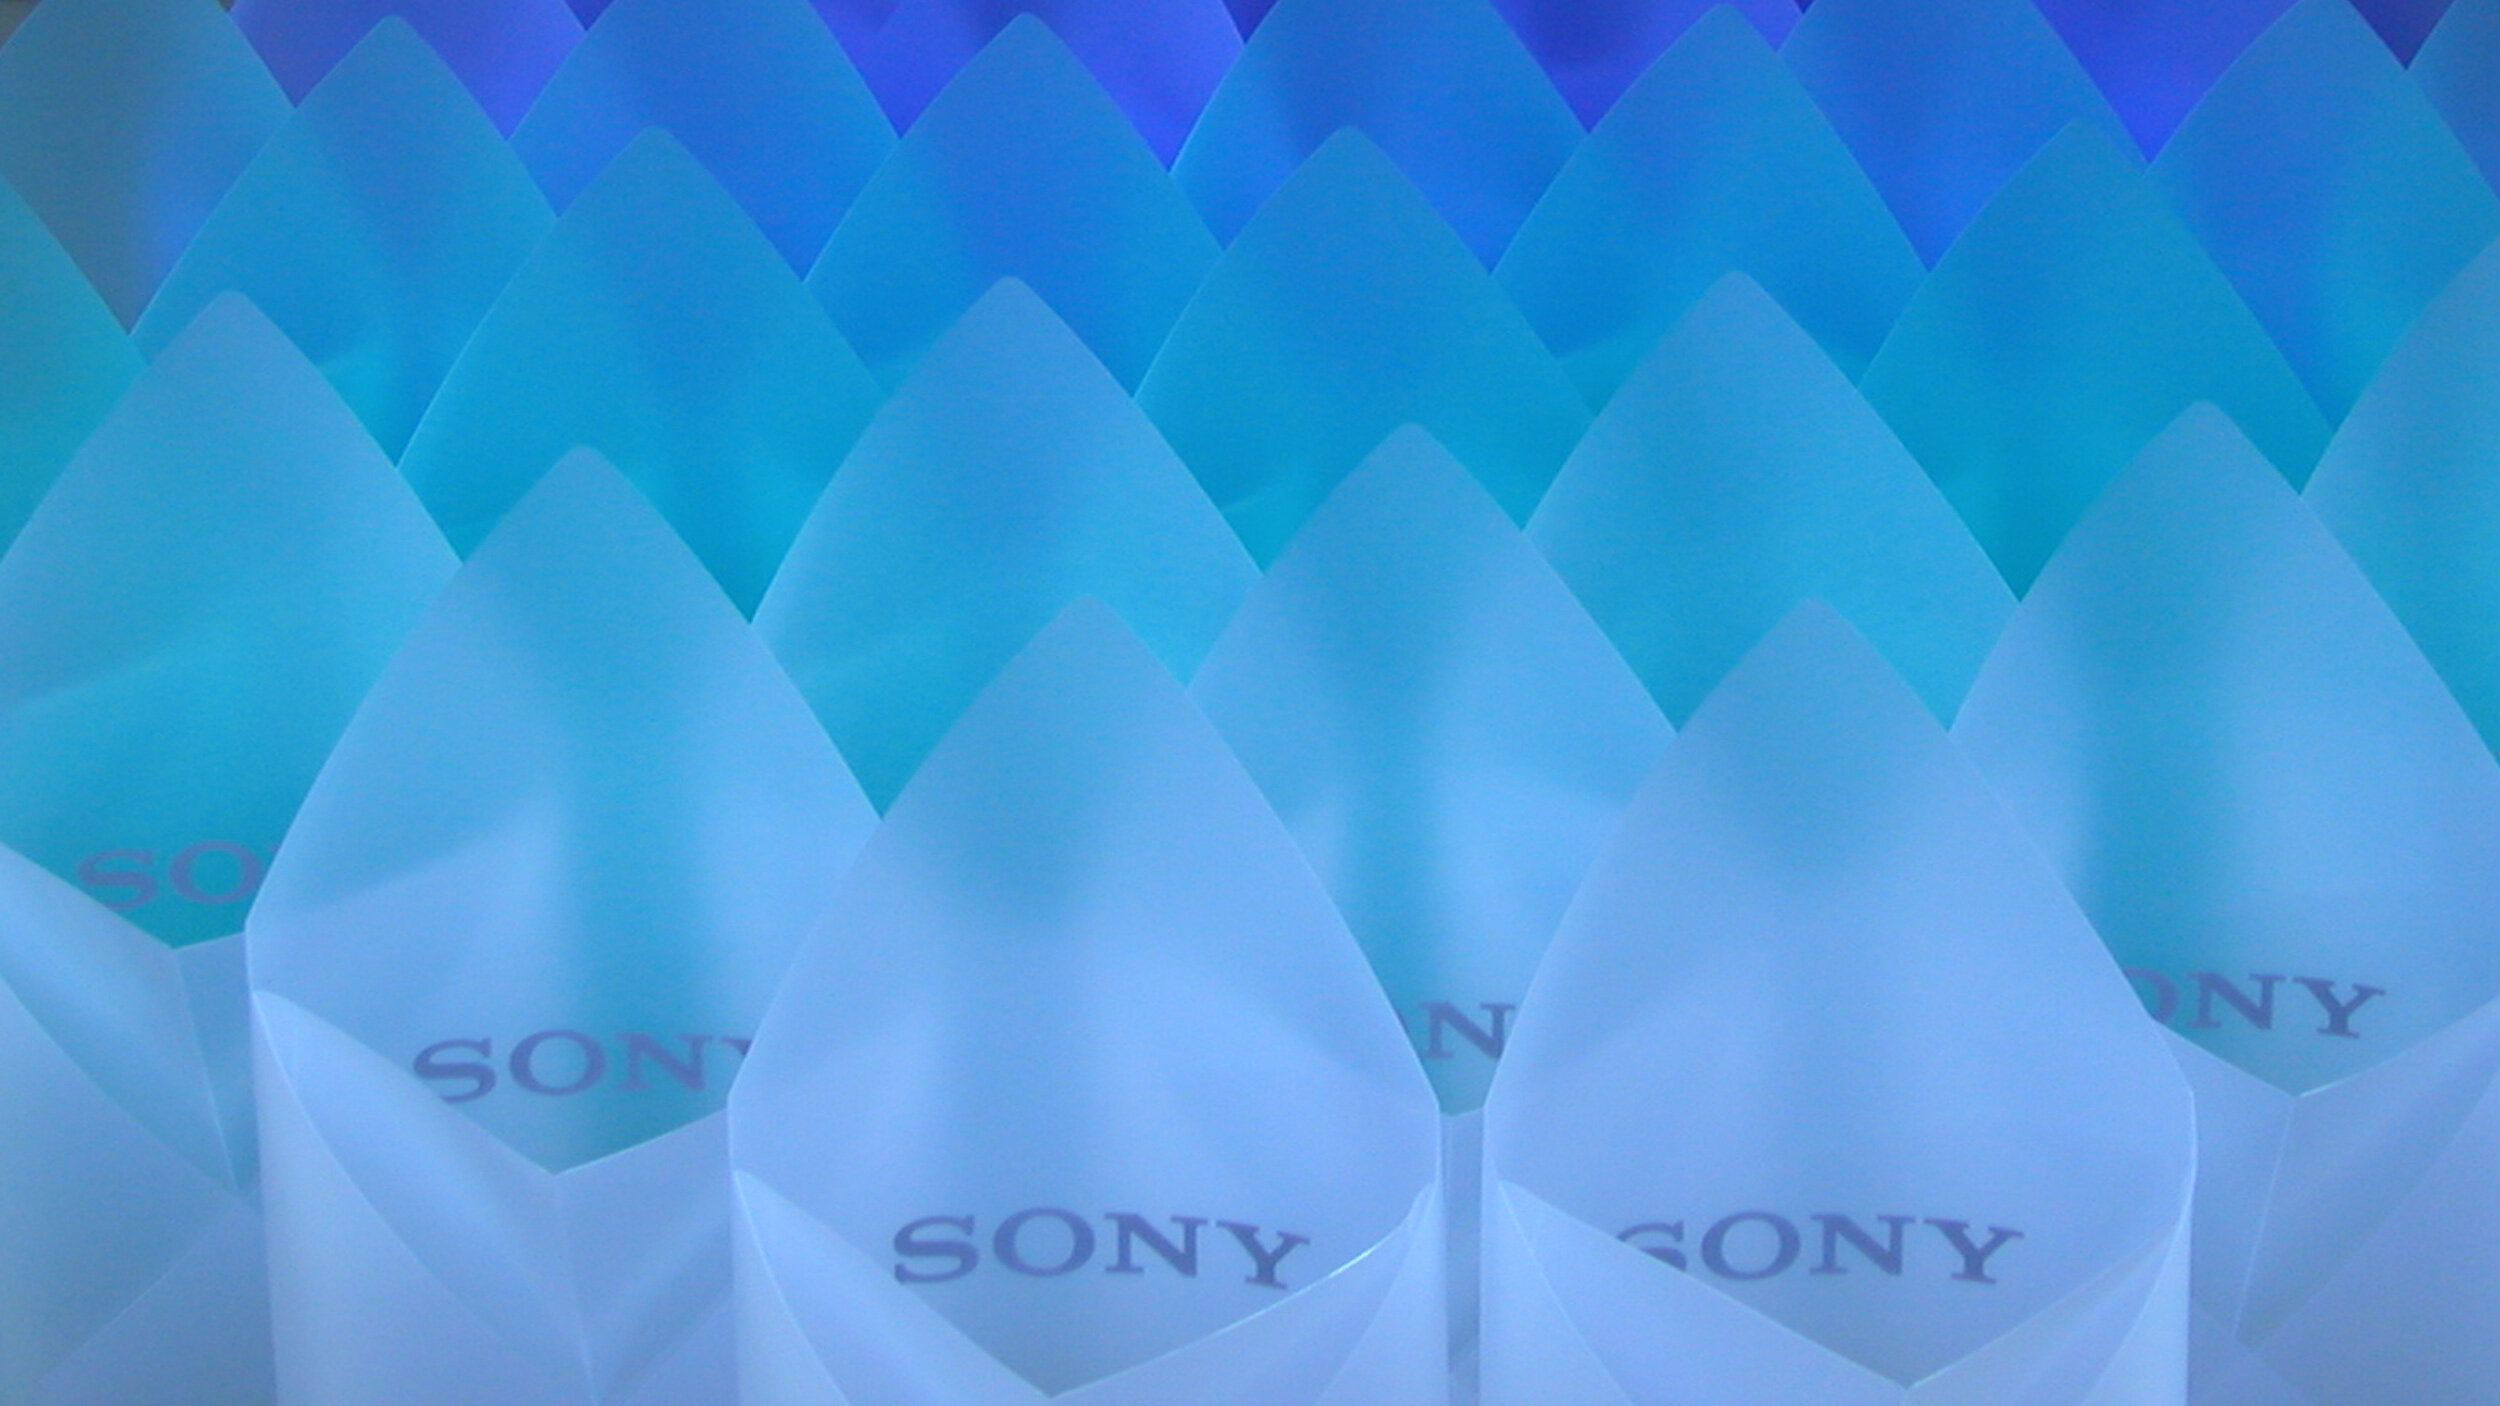 Blue-Marmalade-Made-to-order-Sony-Polyrap-recycled-plastic-paper-bin.jpg